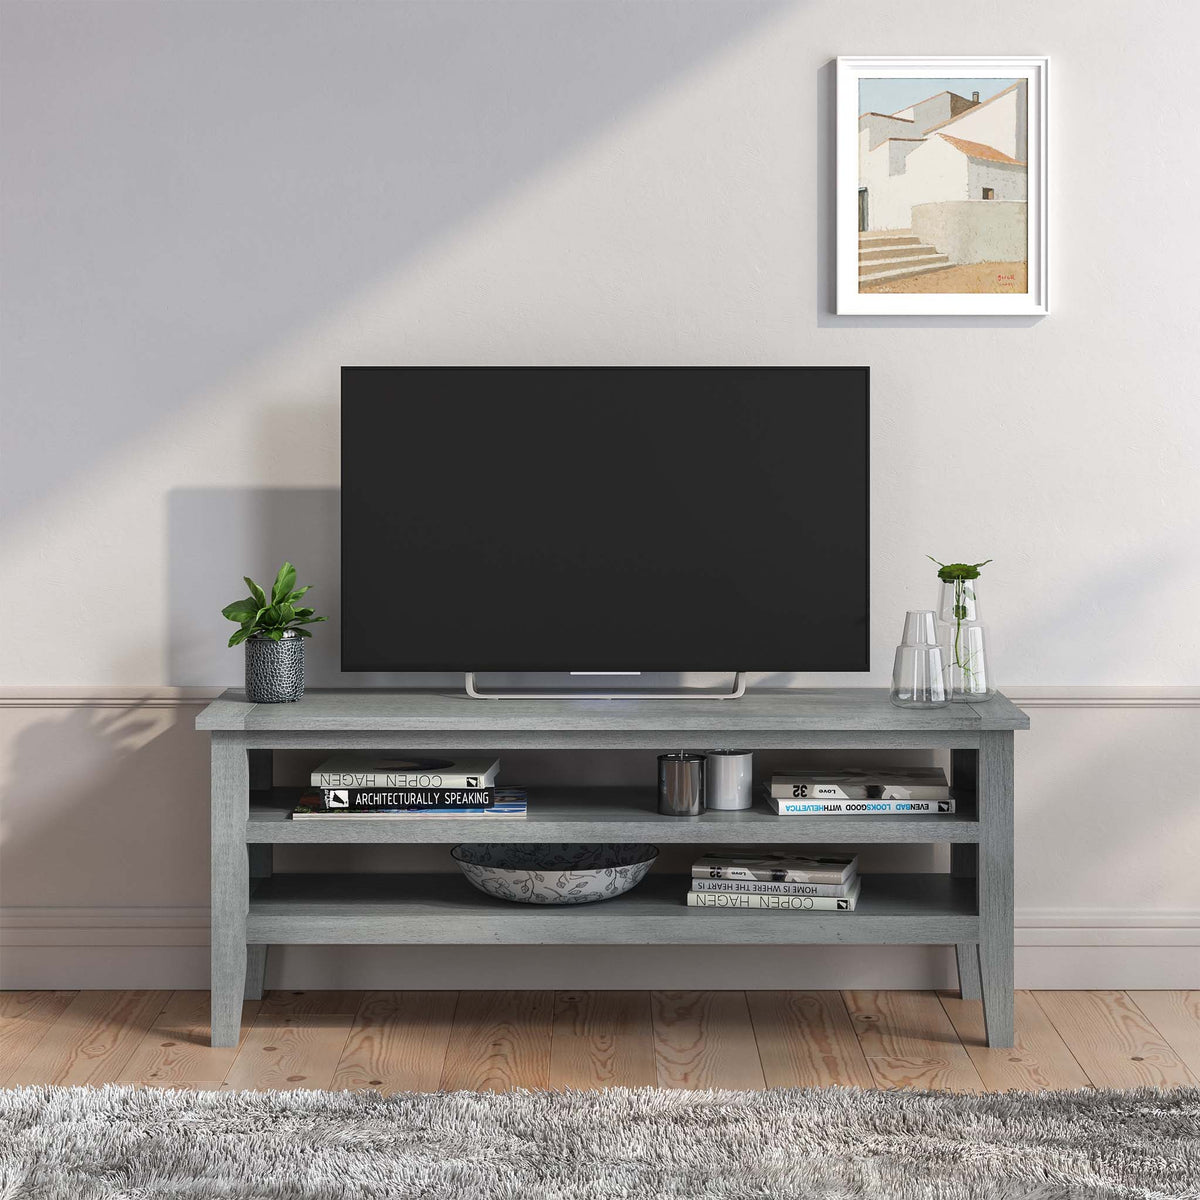 Elise Gris Grey Acacia 120cm TV Unit Stand for living room